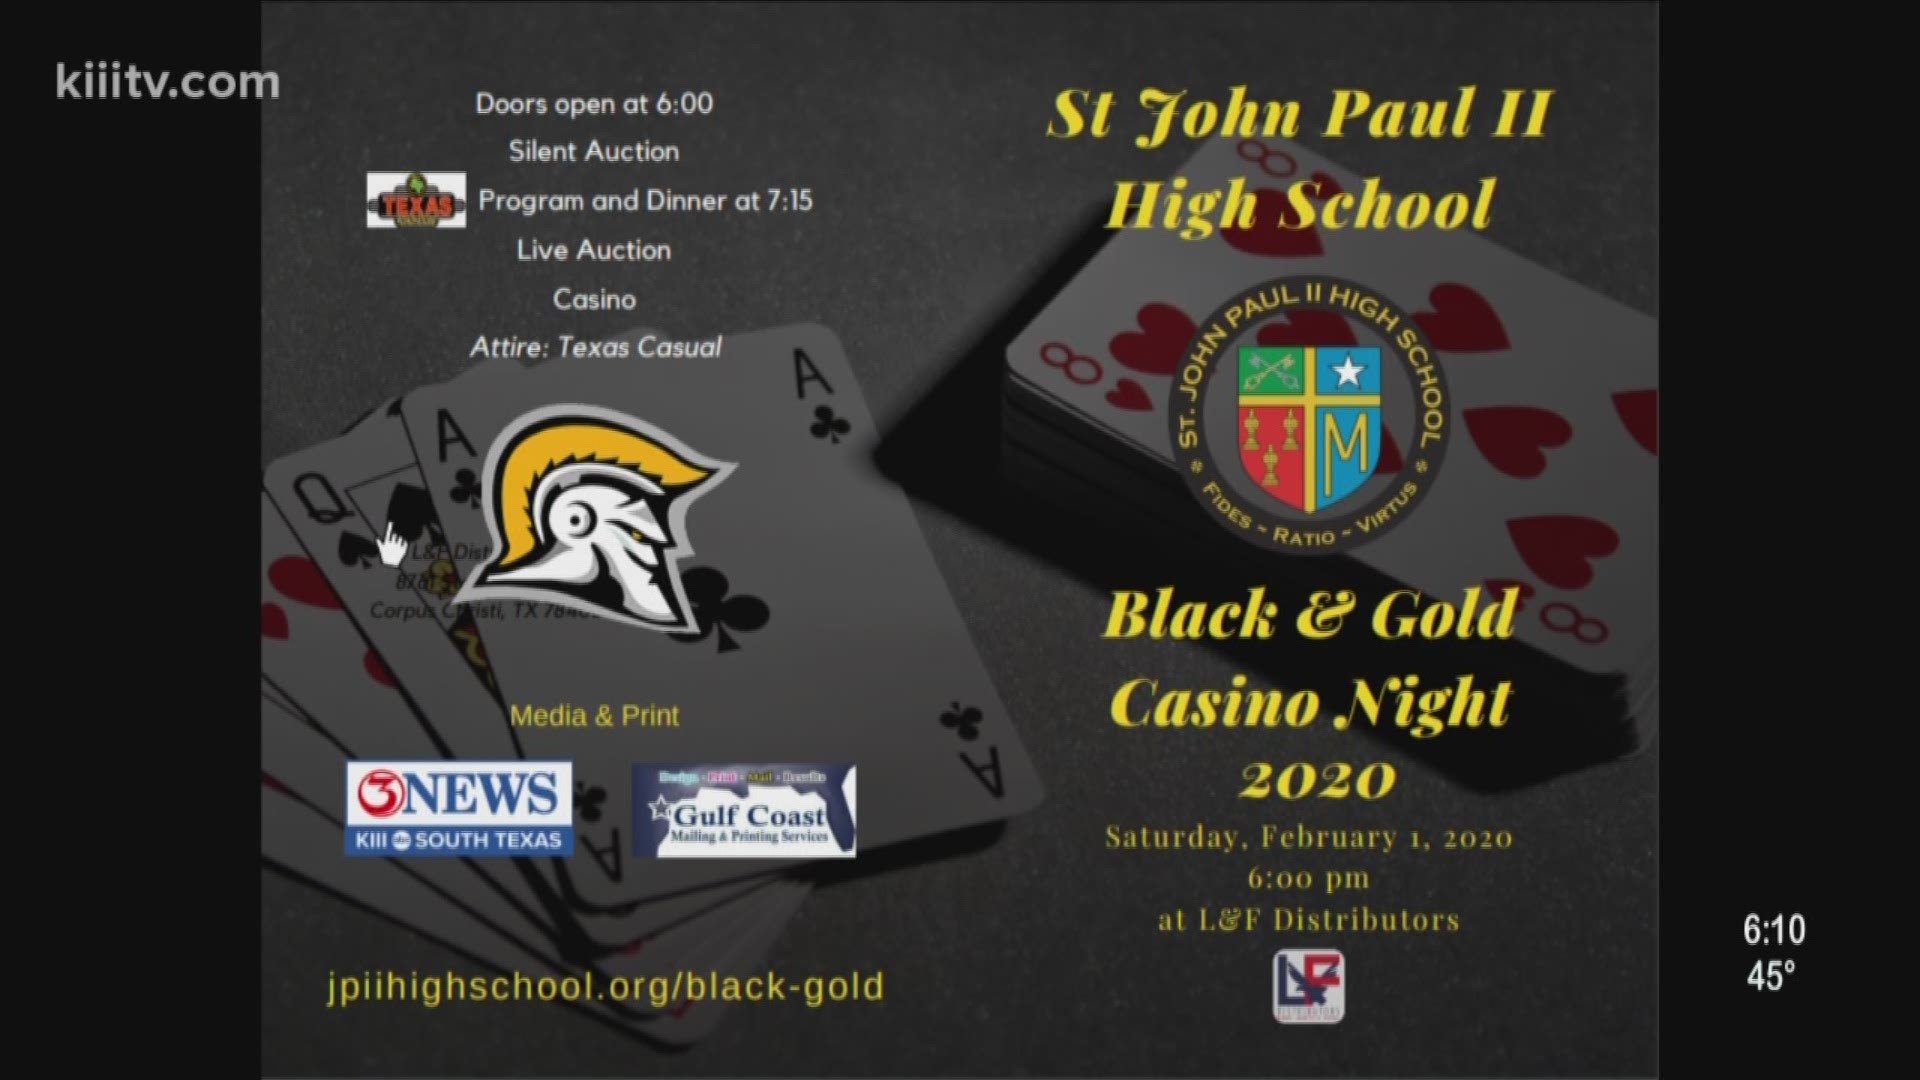 The annual Black and Gold Casino Night fundraiser along with an open house for John Paul II High School and Bishop Garriga Middle School is coming up.